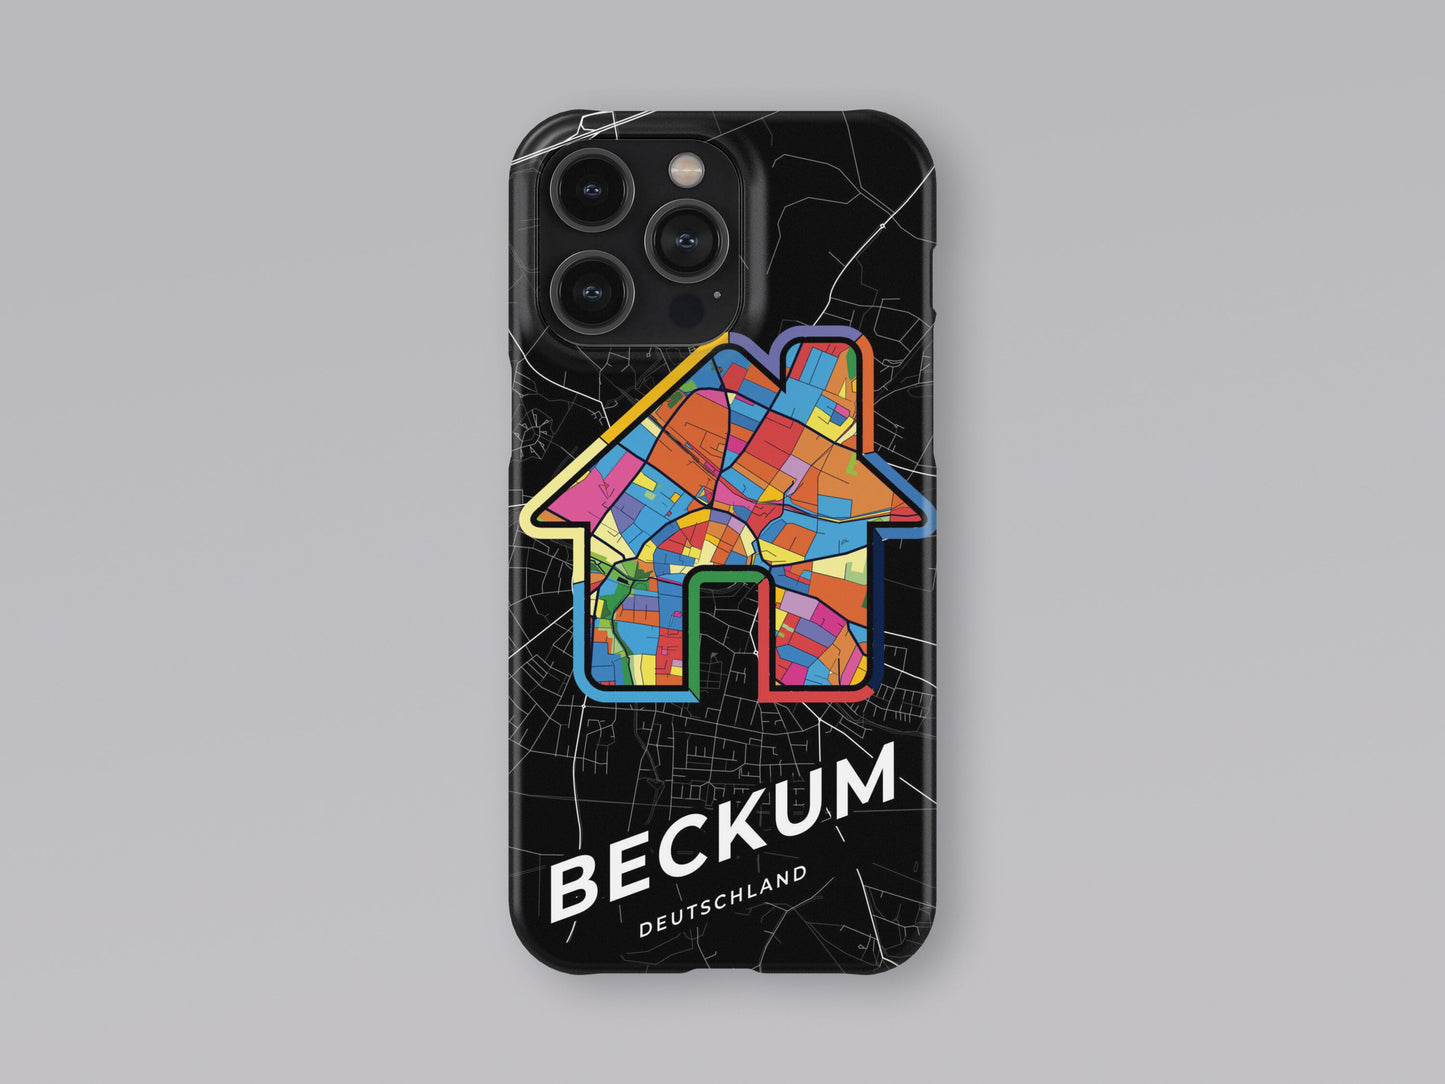 Beckum Deutschland slim phone case with colorful icon. Birthday, wedding or housewarming gift. Couple match cases. 3